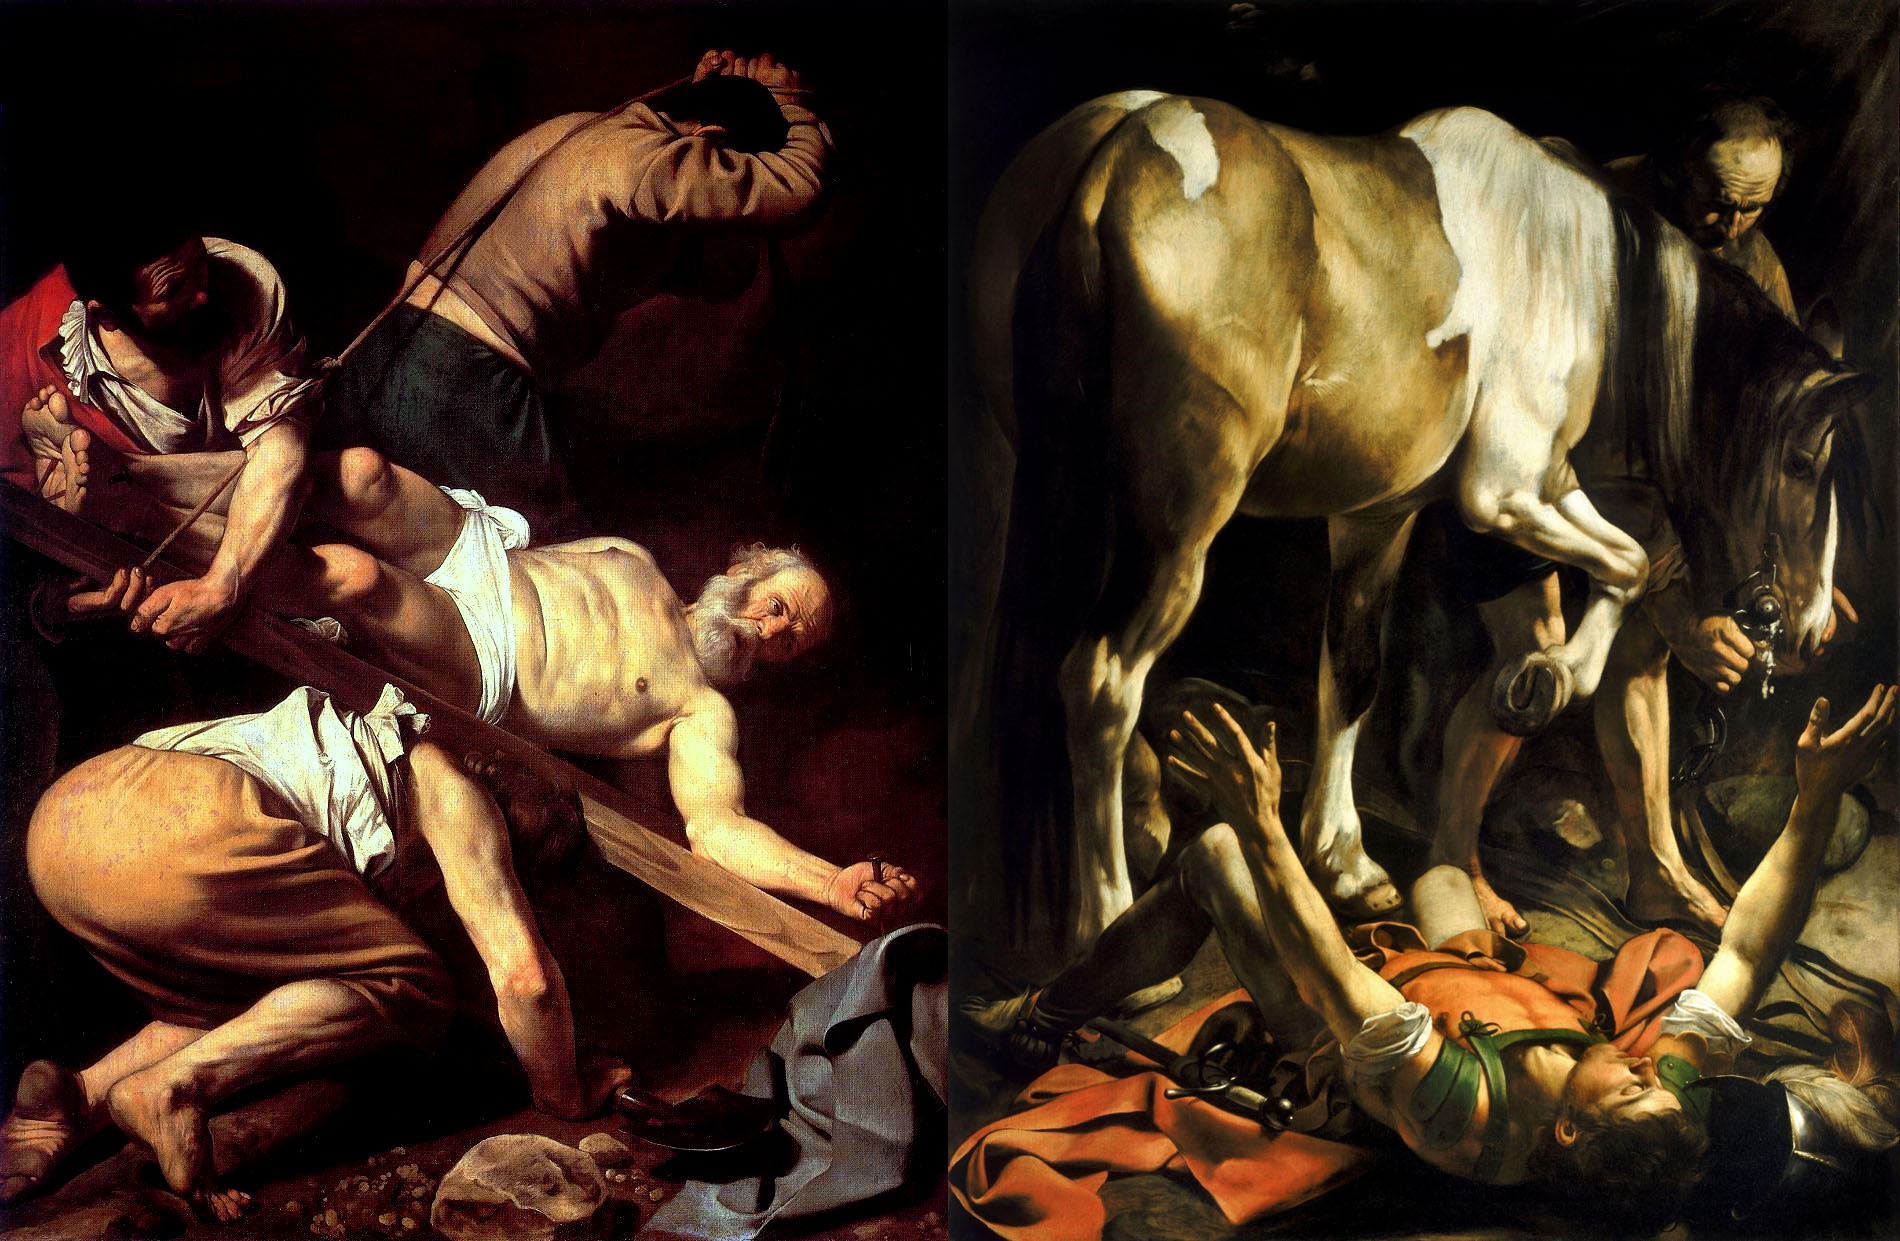 Caravaggio and Vermeer: shadow and light